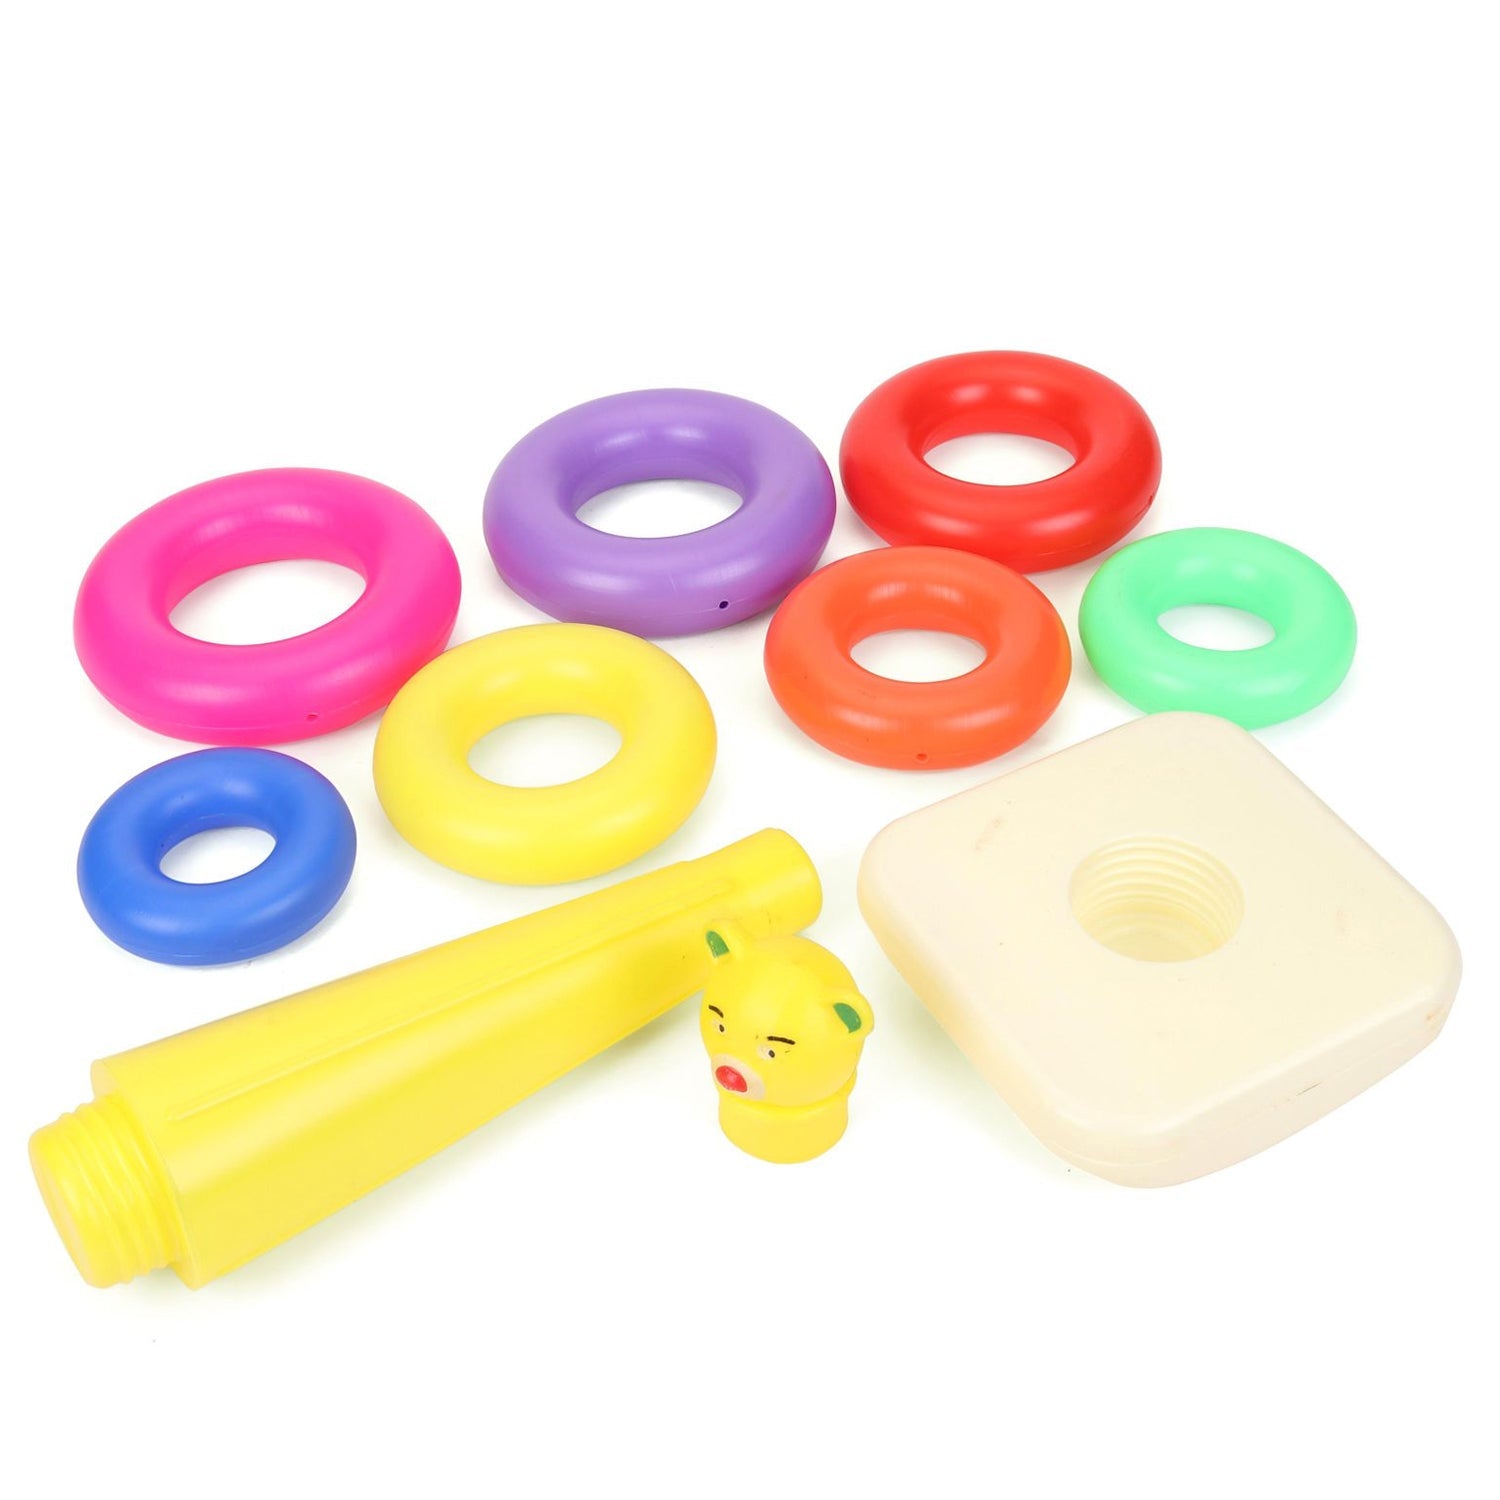 Plastic Baby Kids Teddy Stacking Ring Jumbo Stack Up Educational Toy 7pc